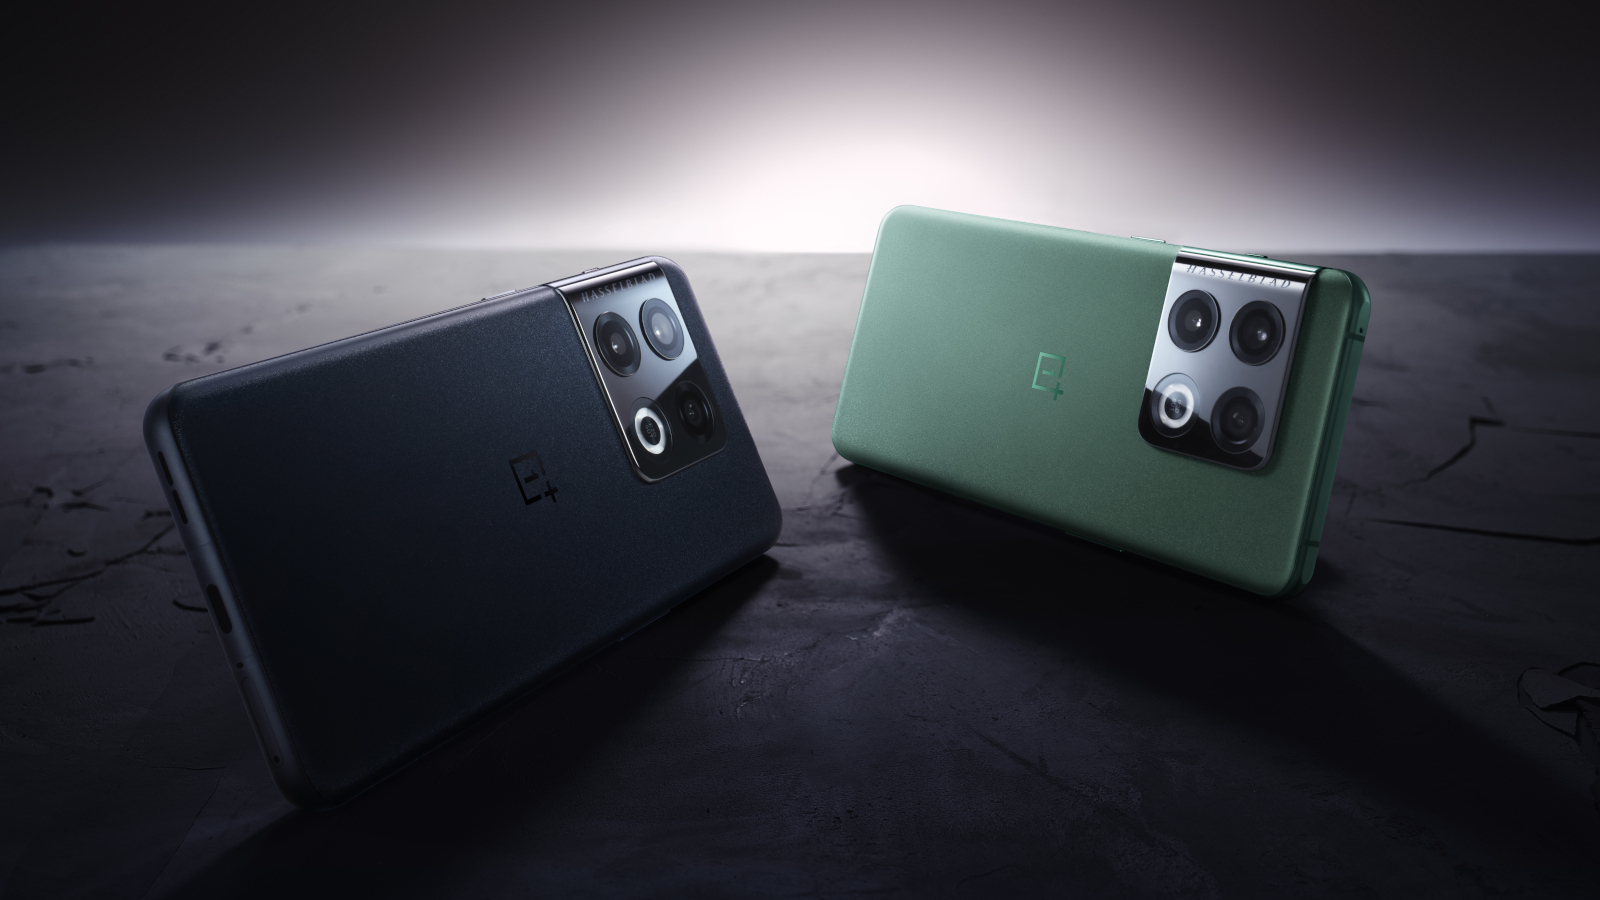 An official render of the OnePlus 10 Pro in Emerald Forest Green and Volcanic Black